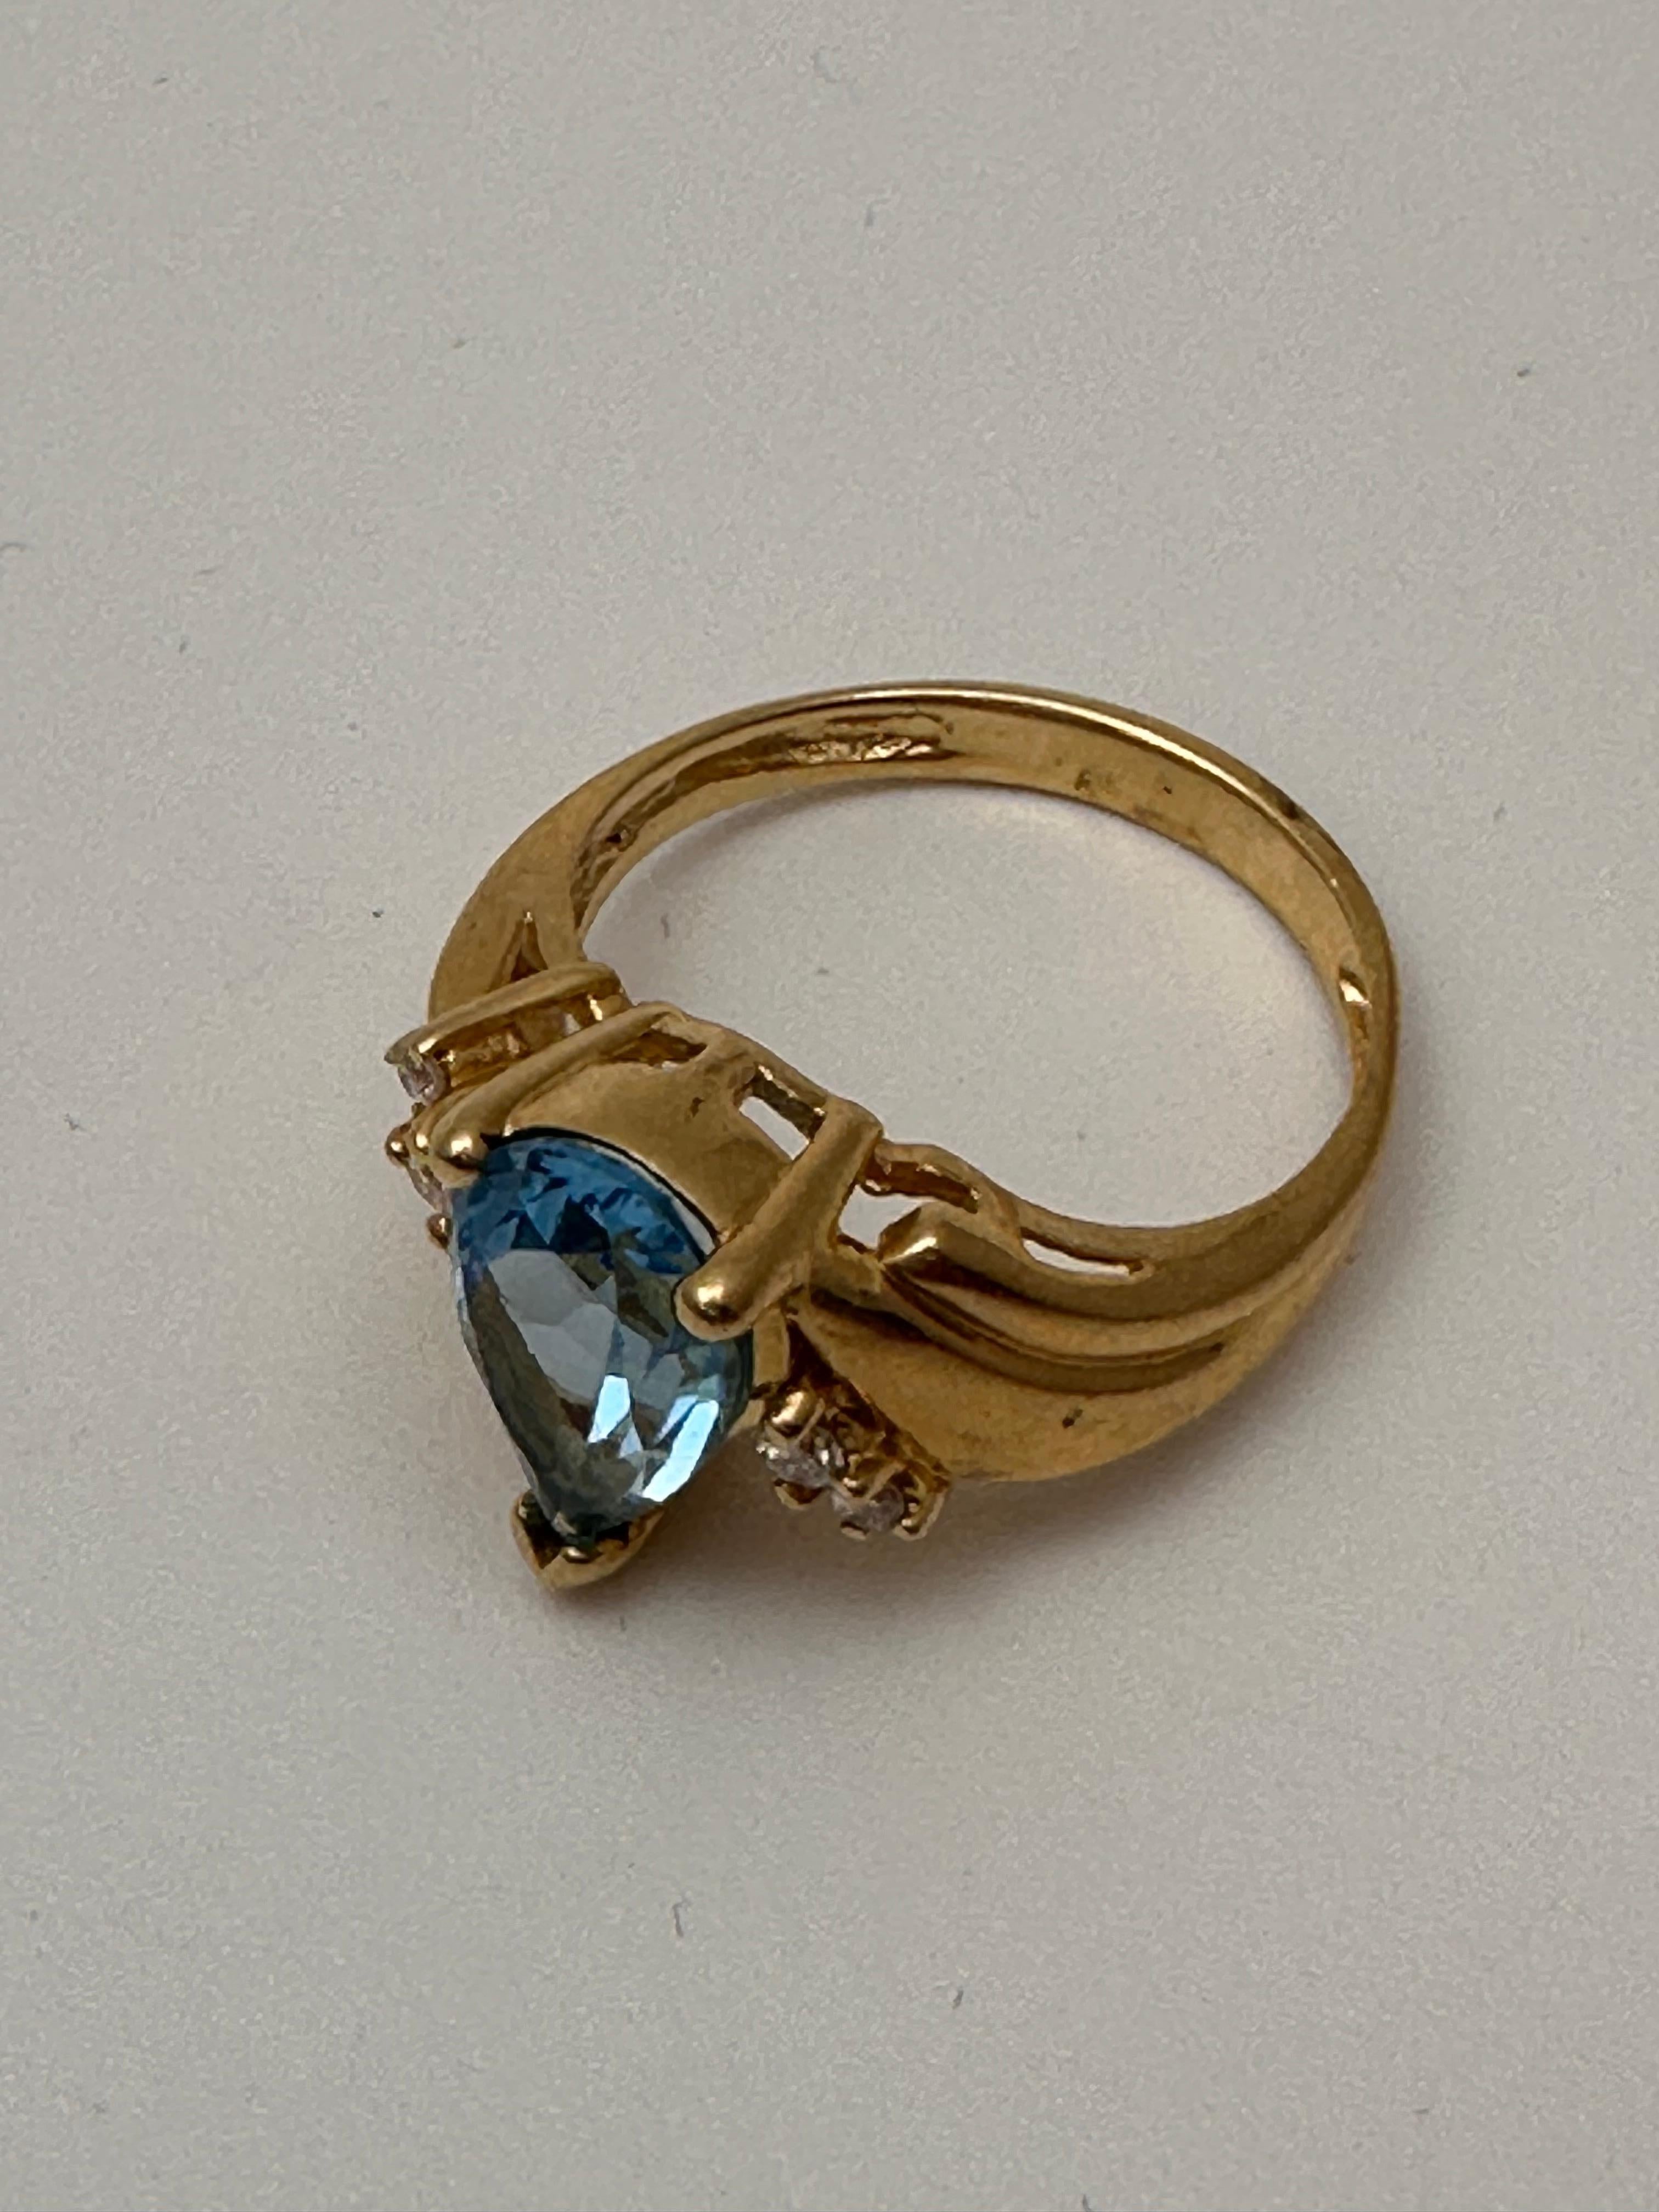 14k Yellow Gold 6.7mm x 10mm Pear Blue Topaz 4 Round Diamond Ring Size 6 1/2 For Sale 2